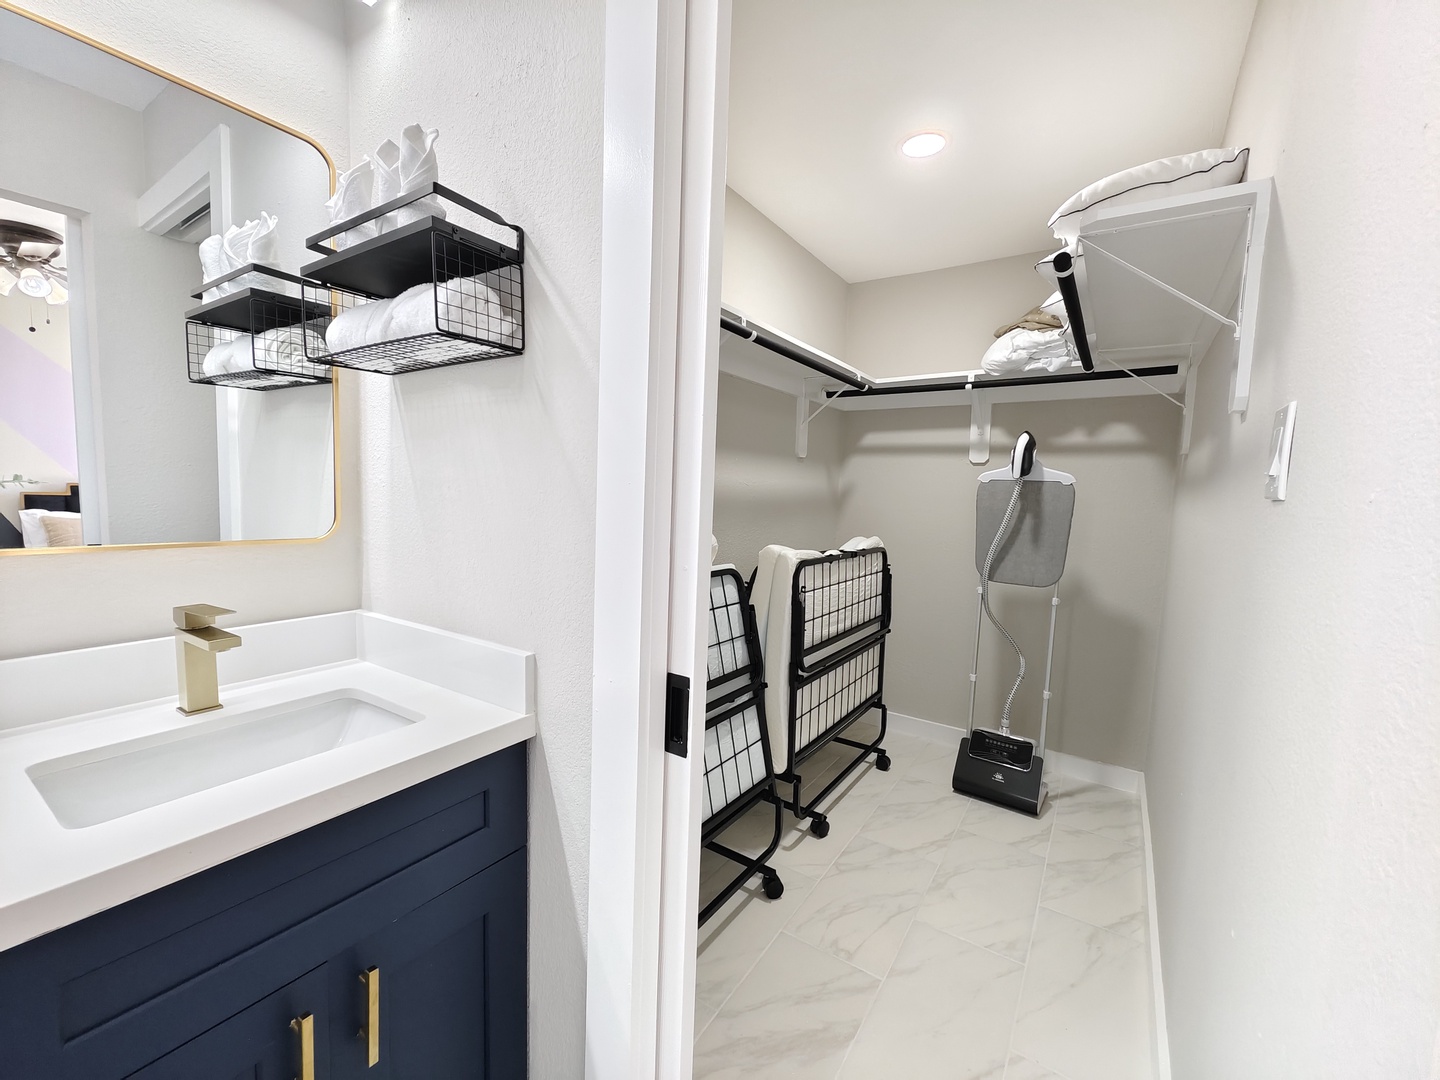 Additional amenities await in the master closet, off the ensuite